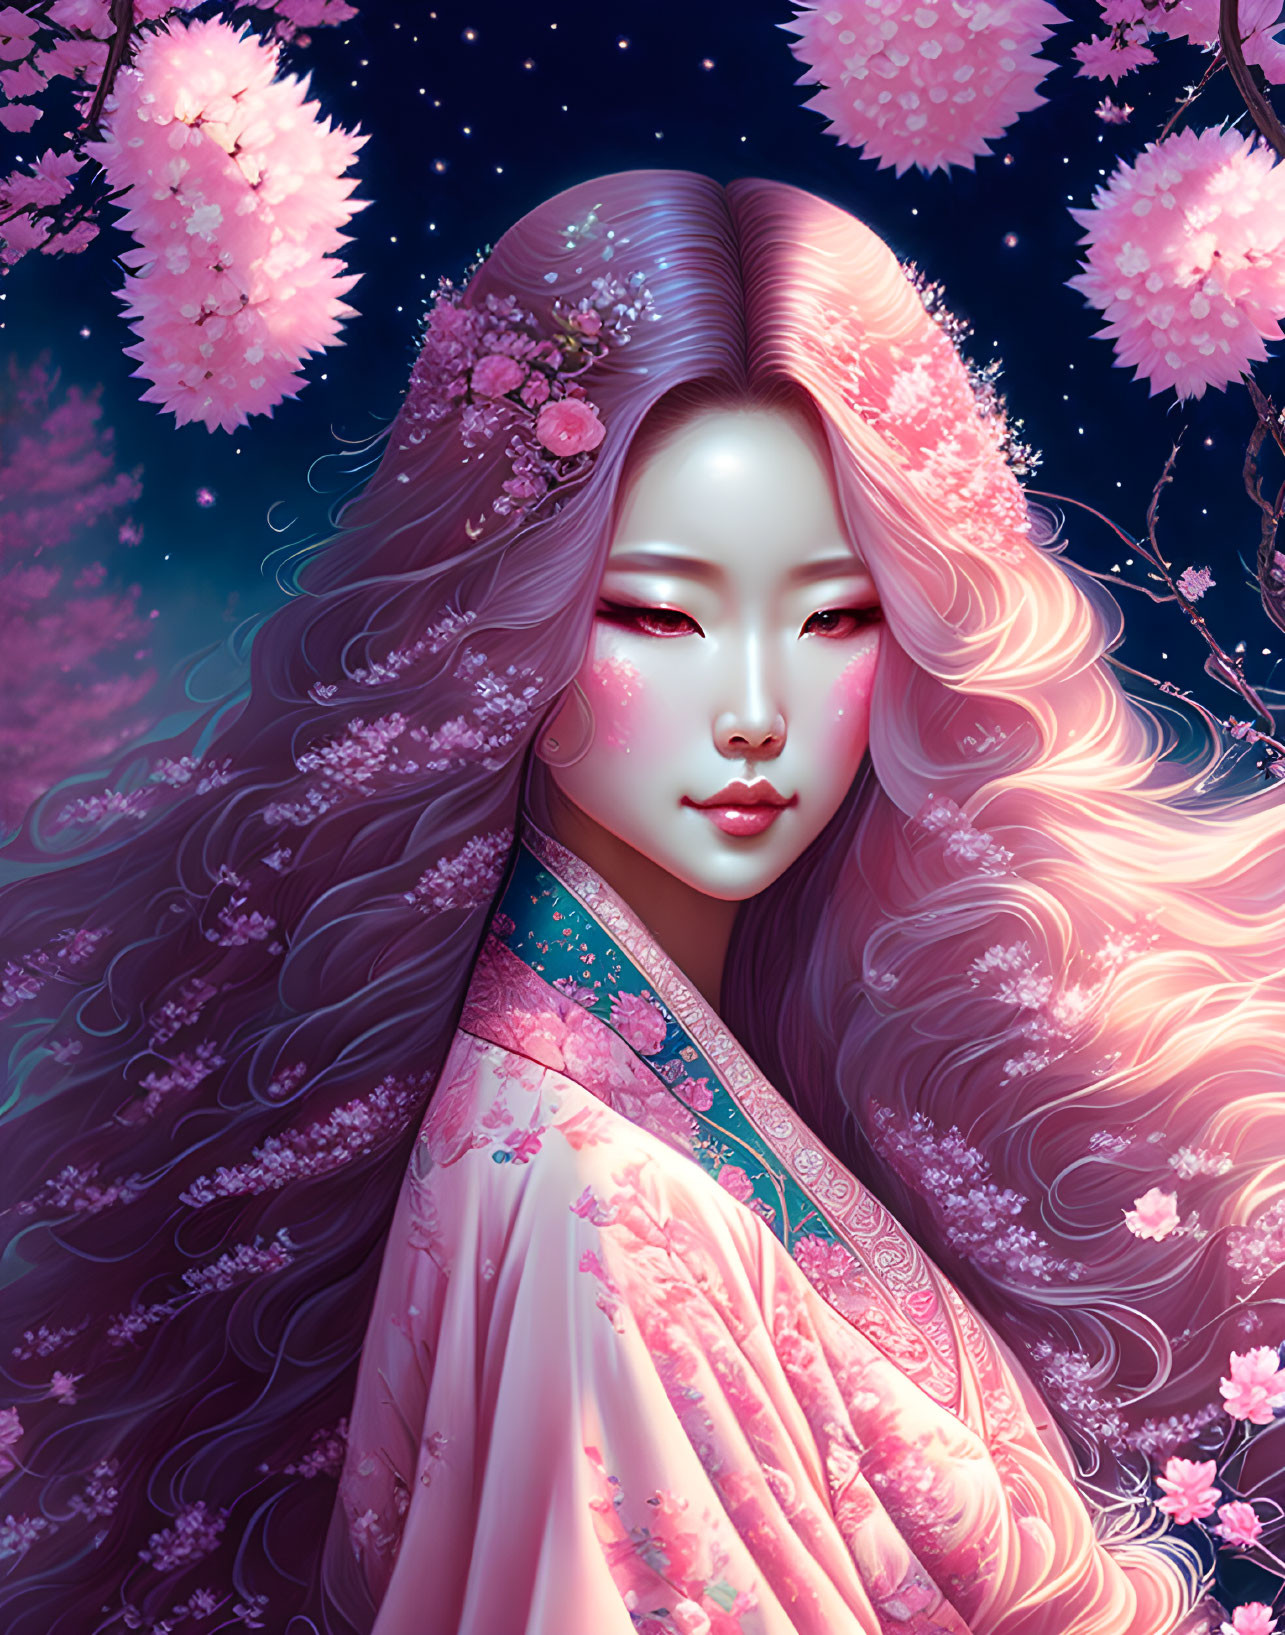 Woman with Long Flowing Hair Surrounded by Cherry Blossoms and Starry Night Sky